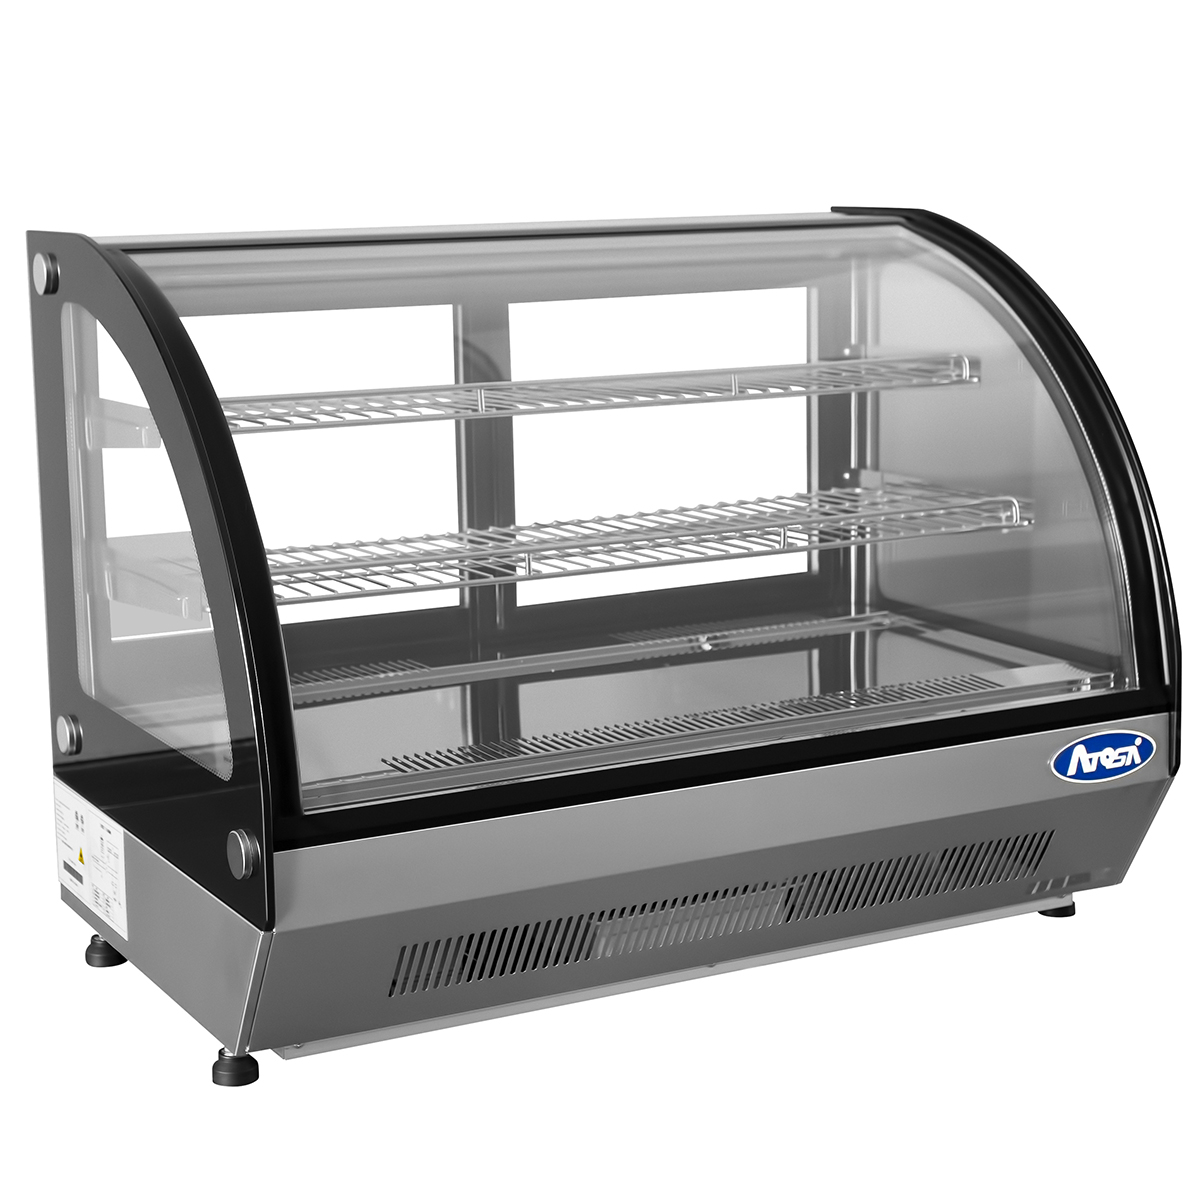 Atosa CRDC-46 Refrigerated Countertop Display Case, 4.6 cu.ft. - 35-2/5"W x 22-1/10"D x 26-2/5"H image 1